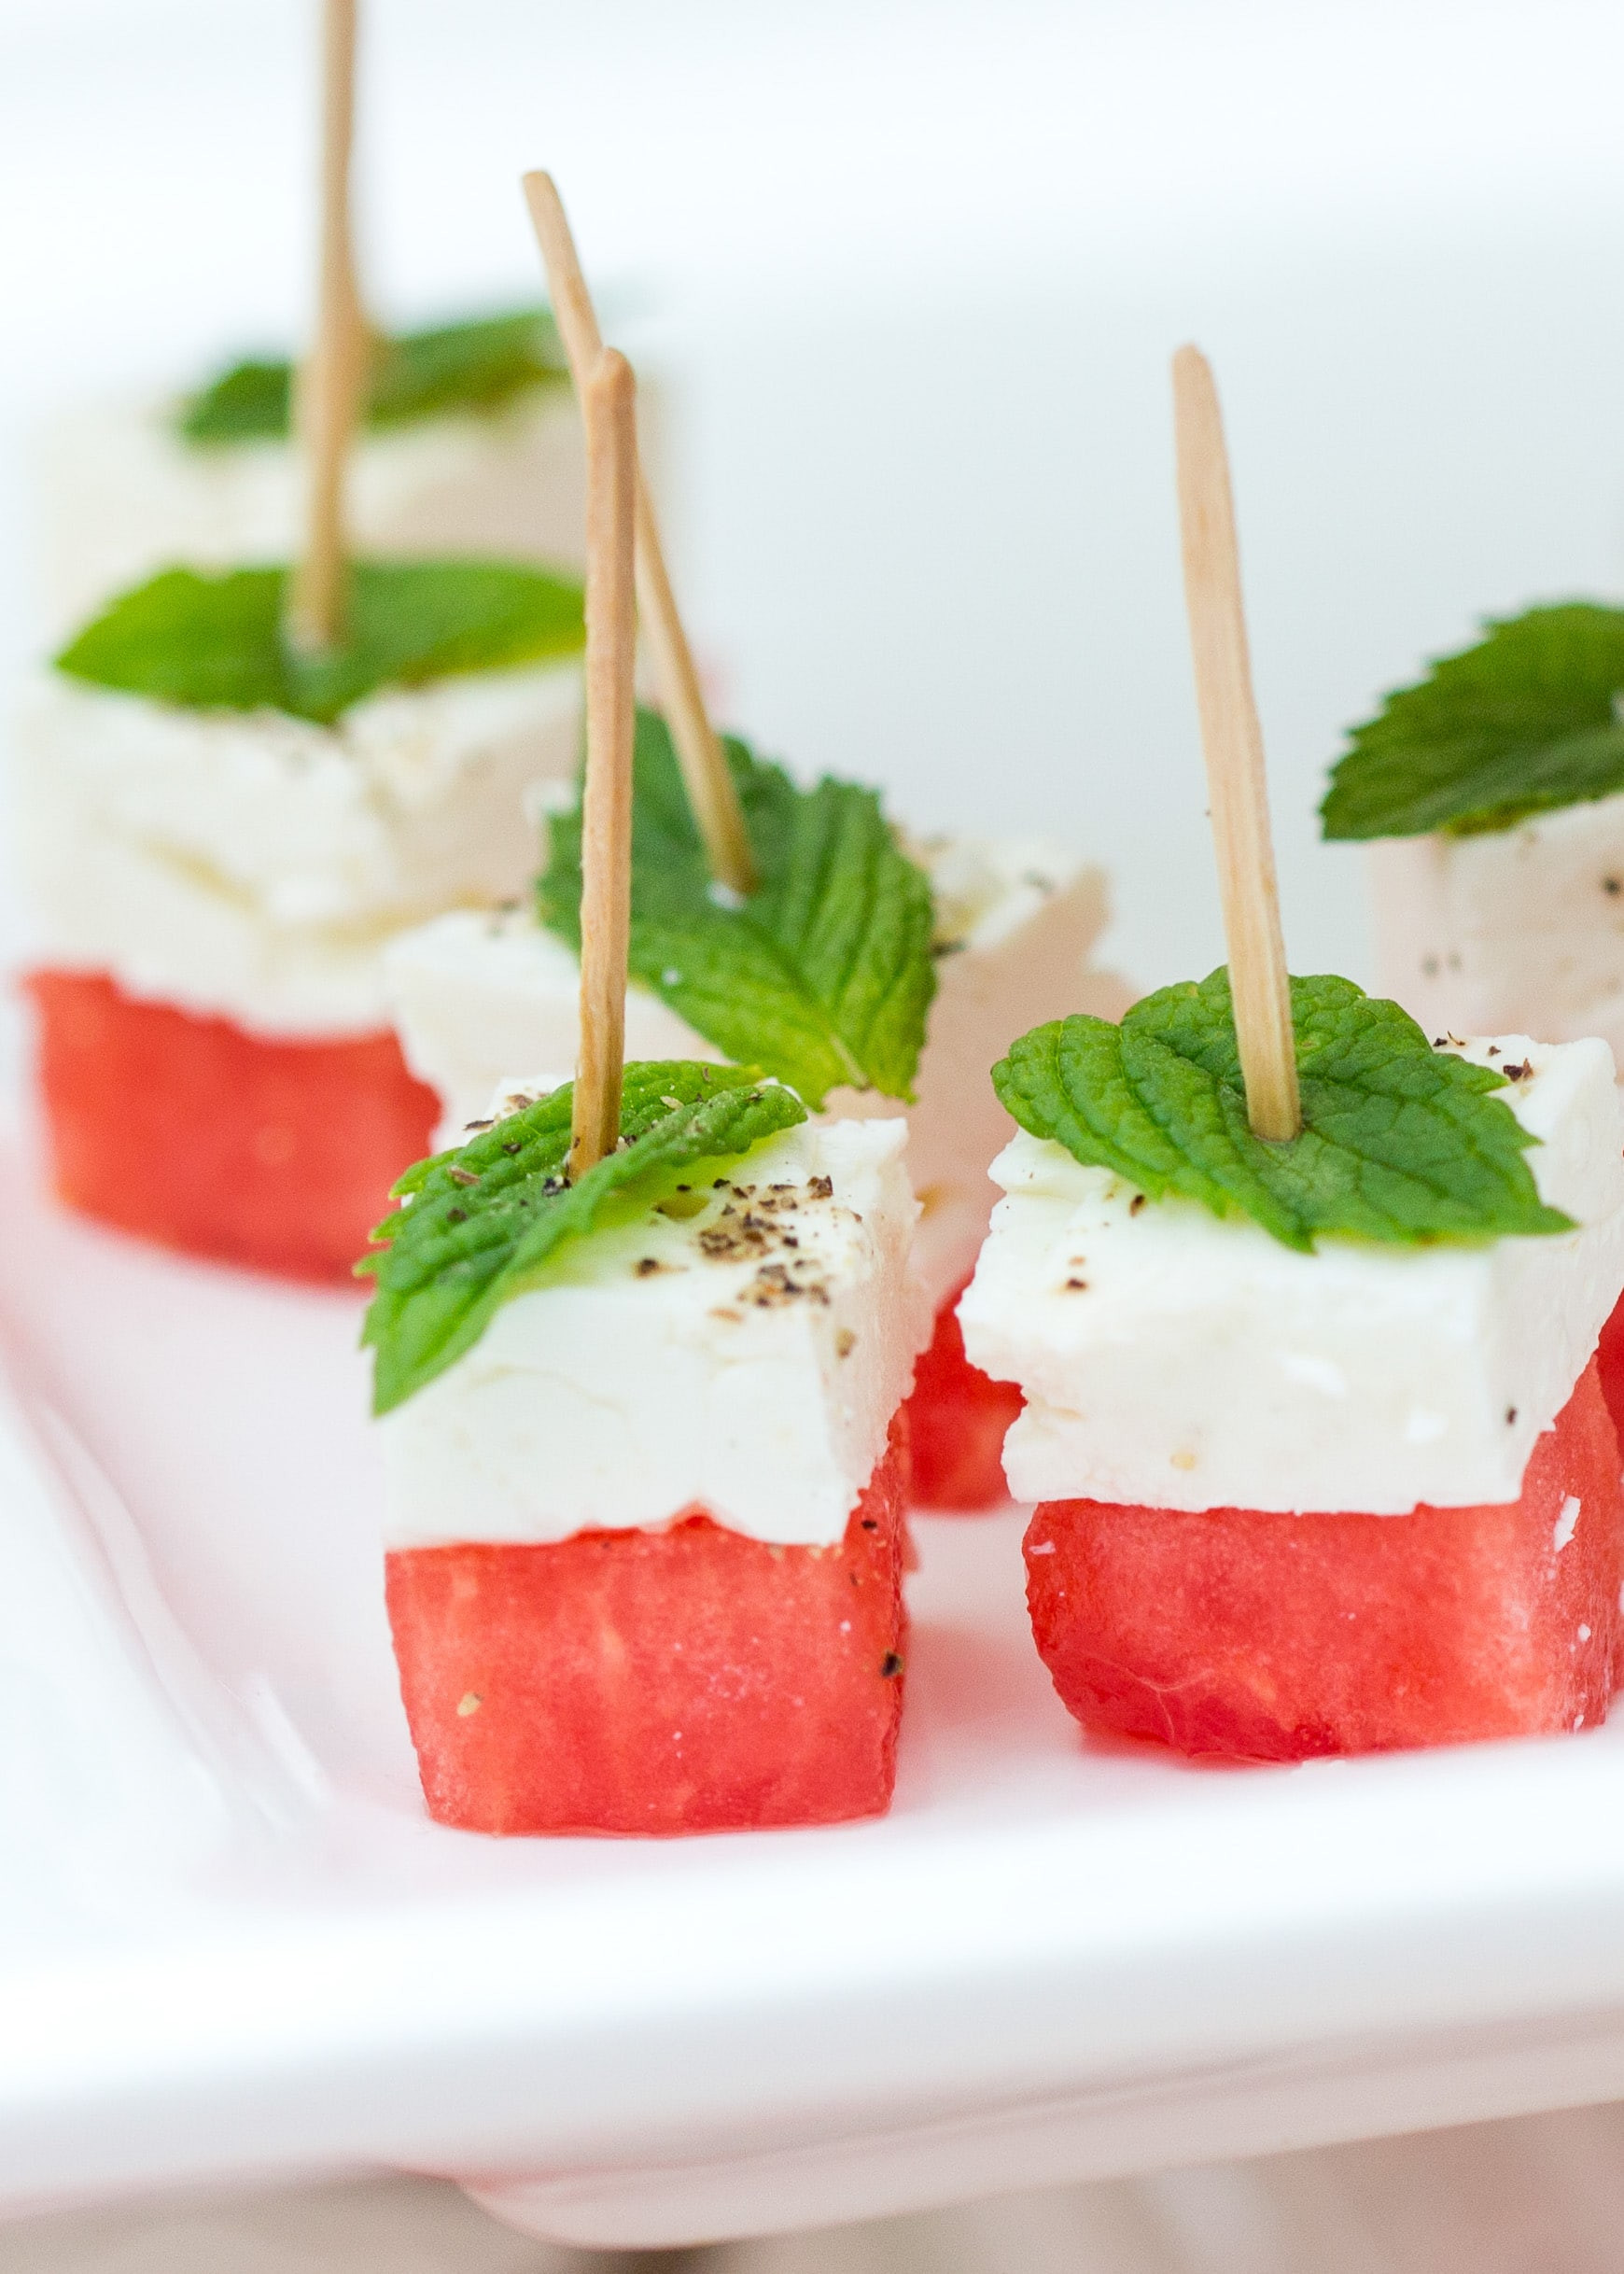 Easy Appetizers Healthy
 Healthy Summer Appetizers Easy & Delish Pizzazzerie